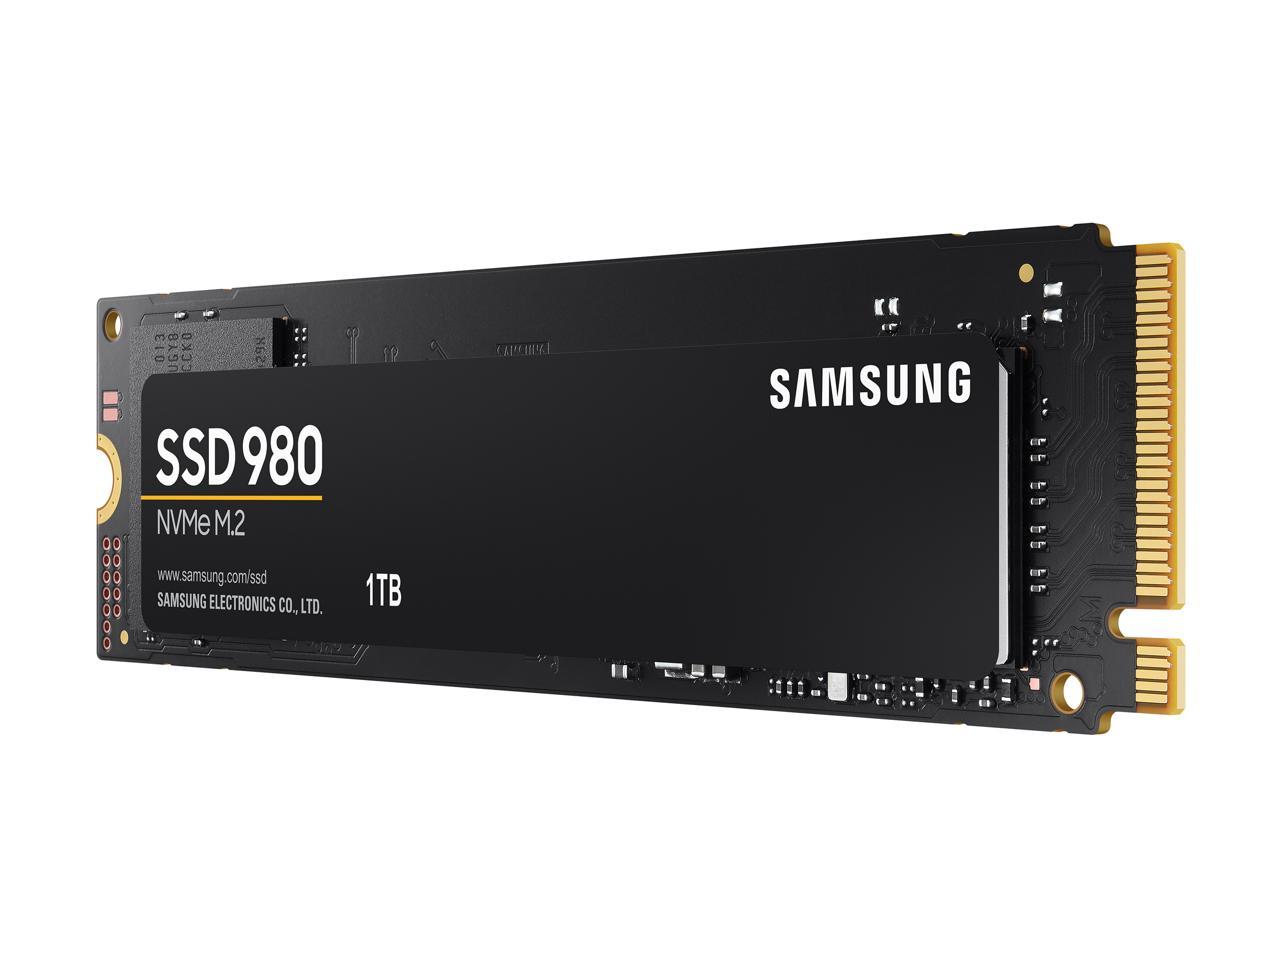 1TB Samsung 980 NVMe Internal Solid State Drive $63 + Free Shipping